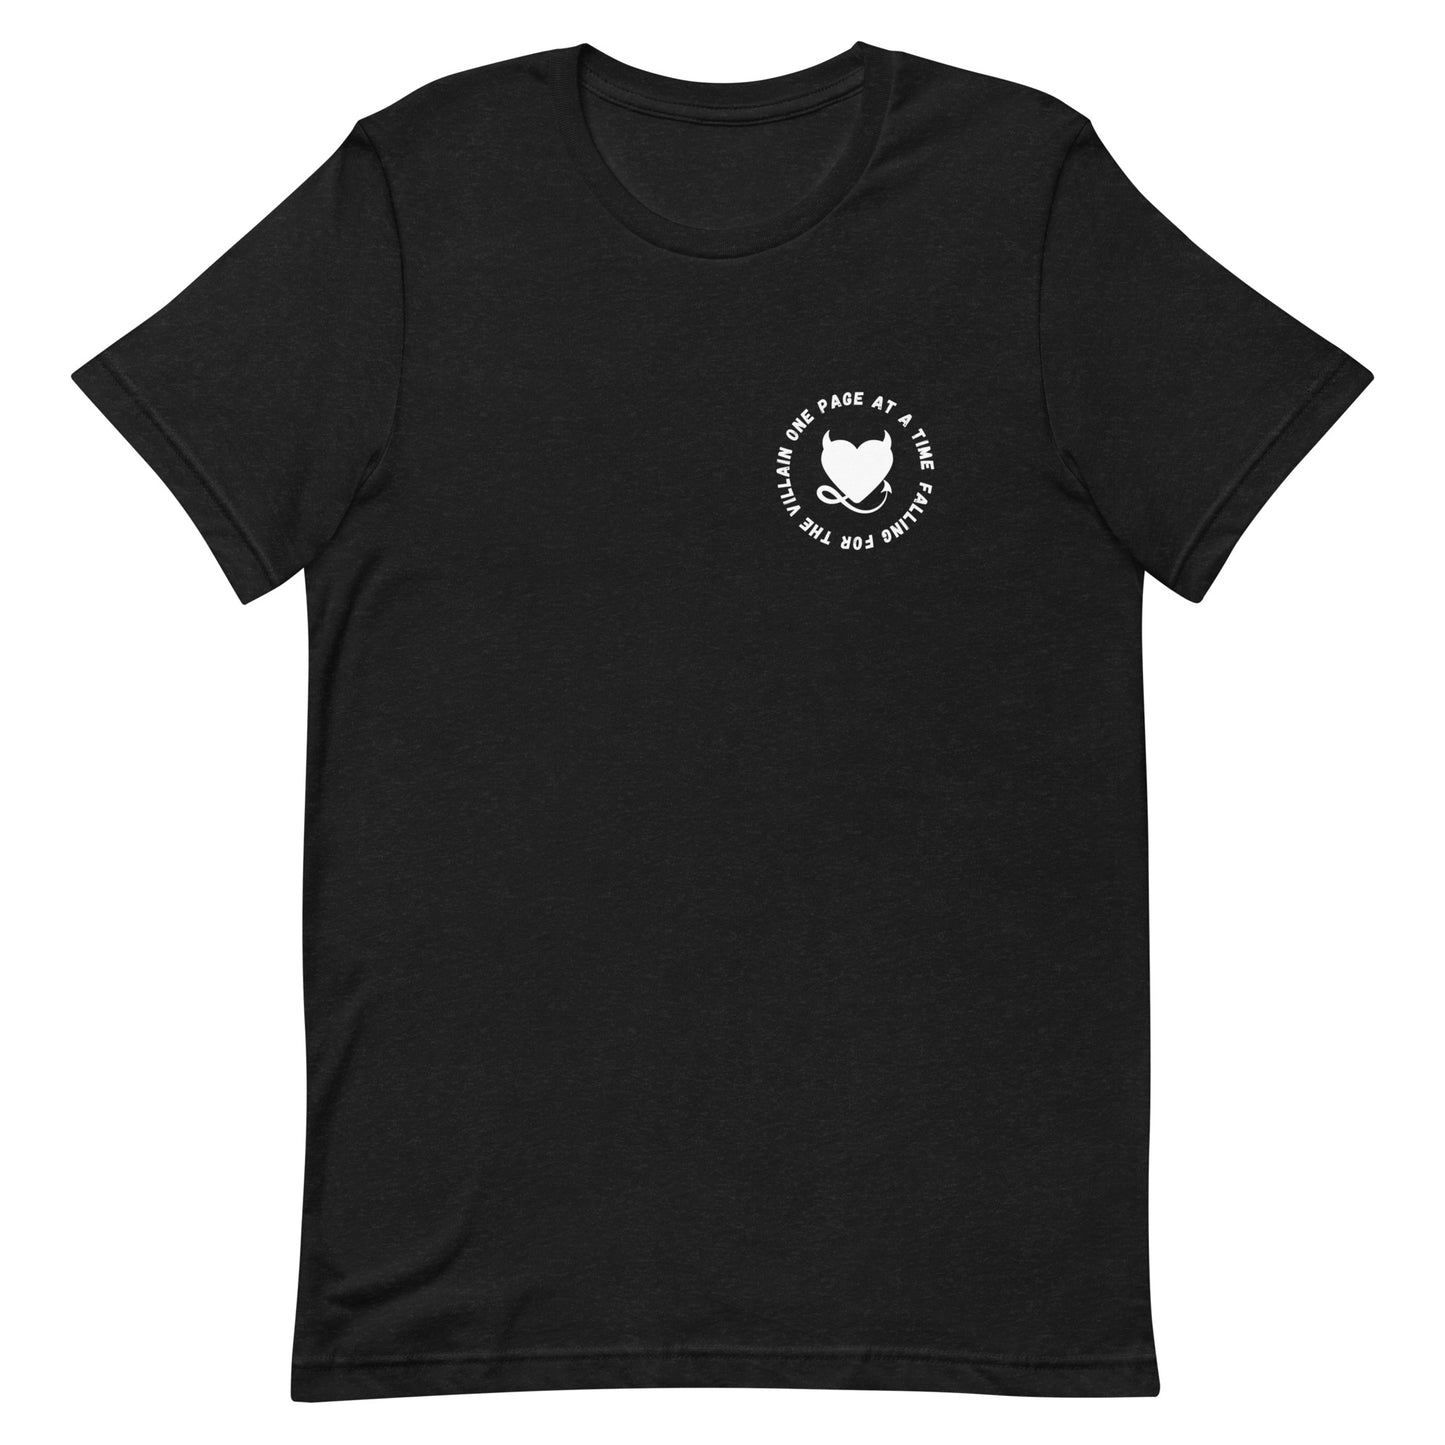 falling for the villain one page at a time t-shirt